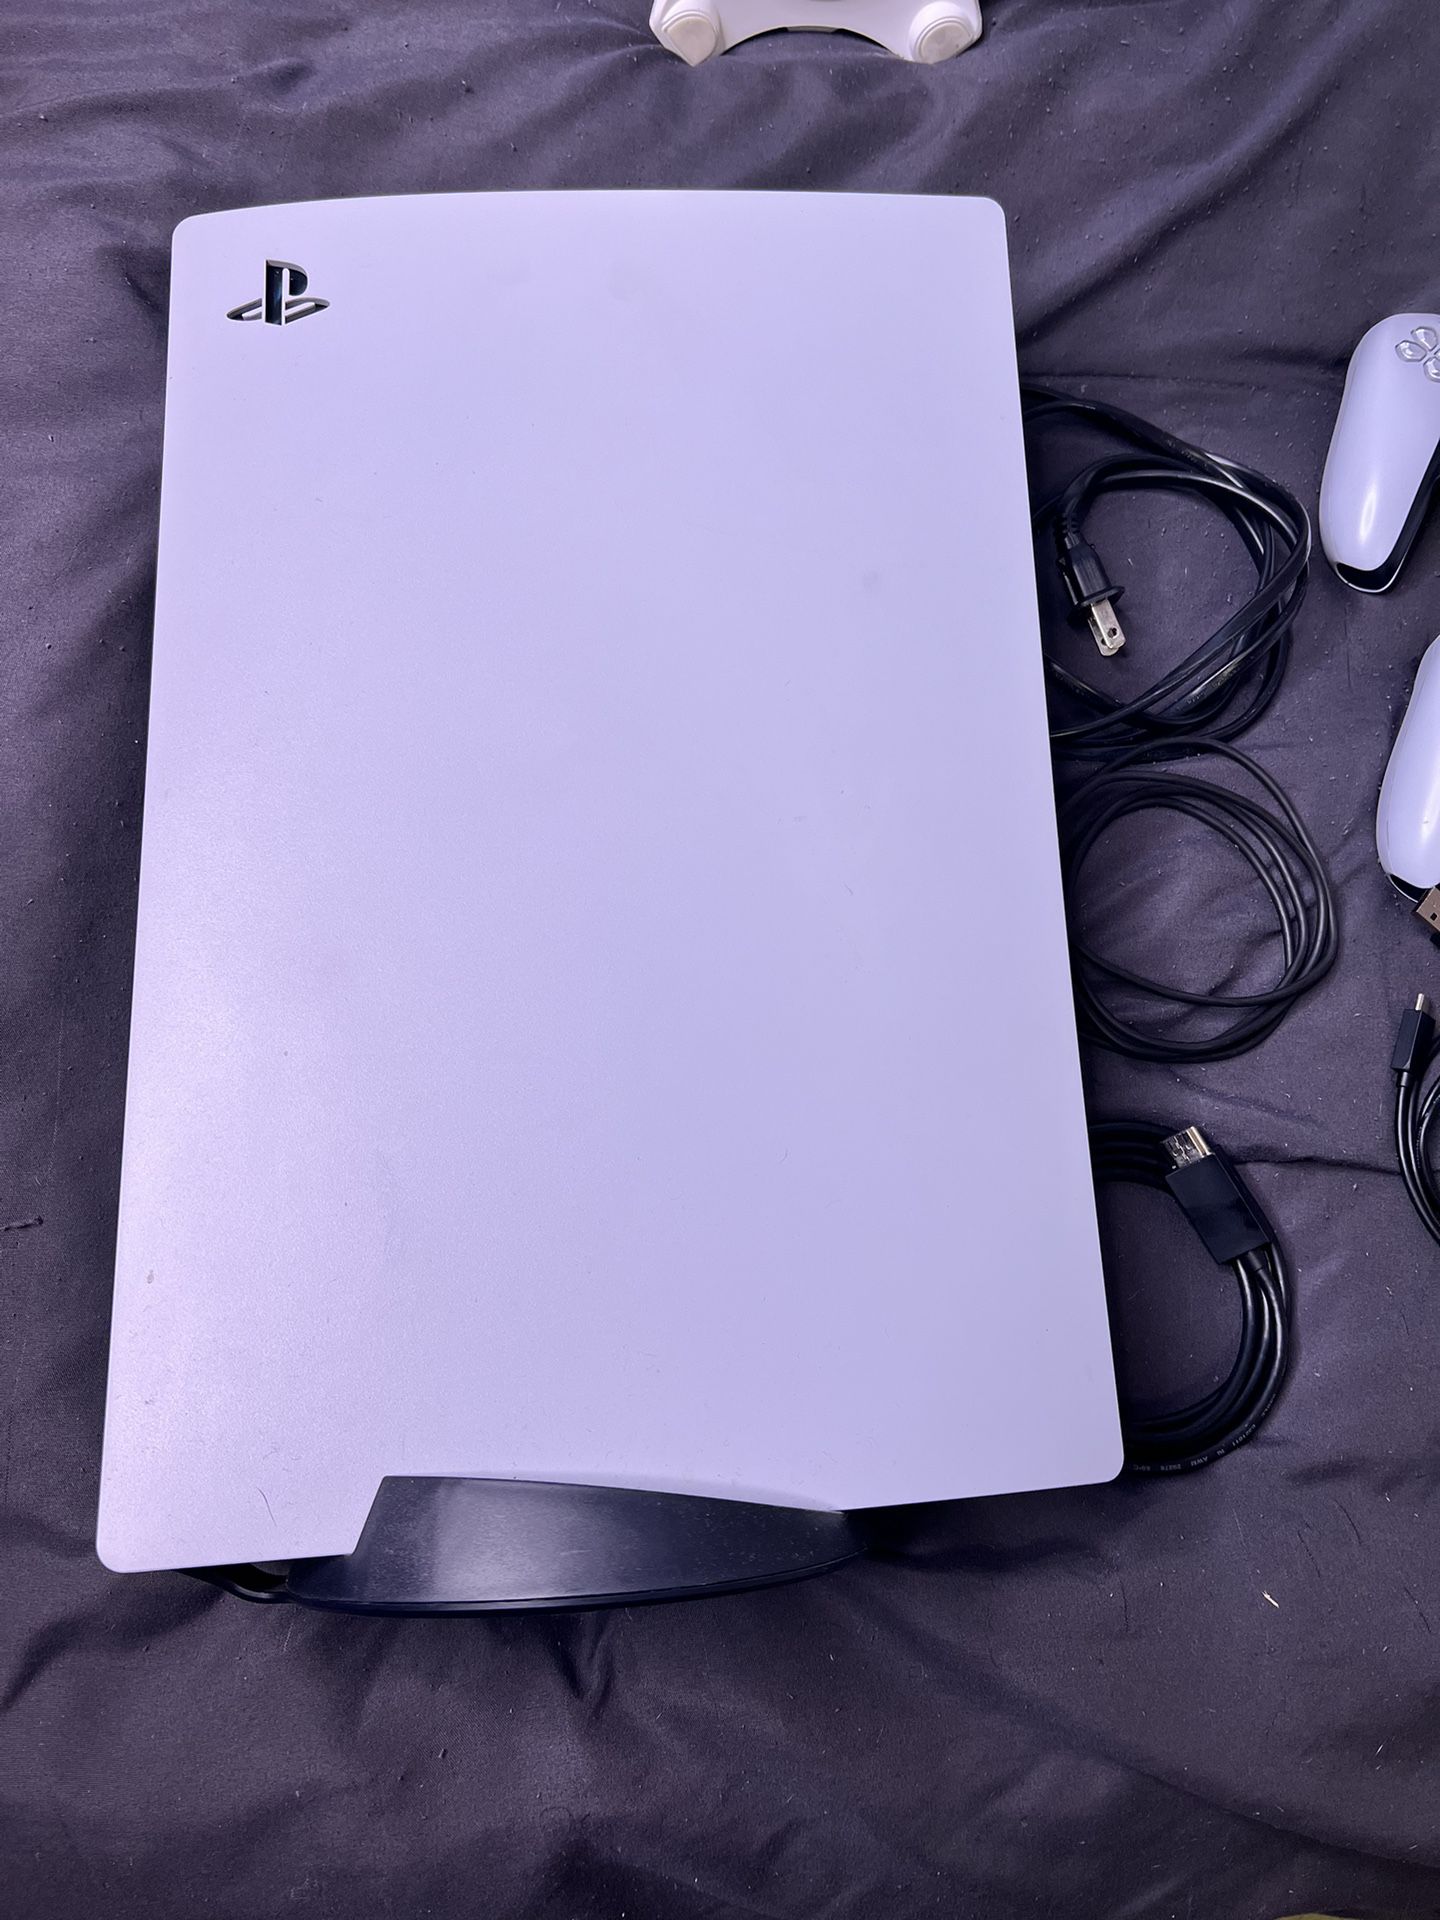 PS5 + 2 Controllers And Charging Doc + Streaming Set Up For Sale